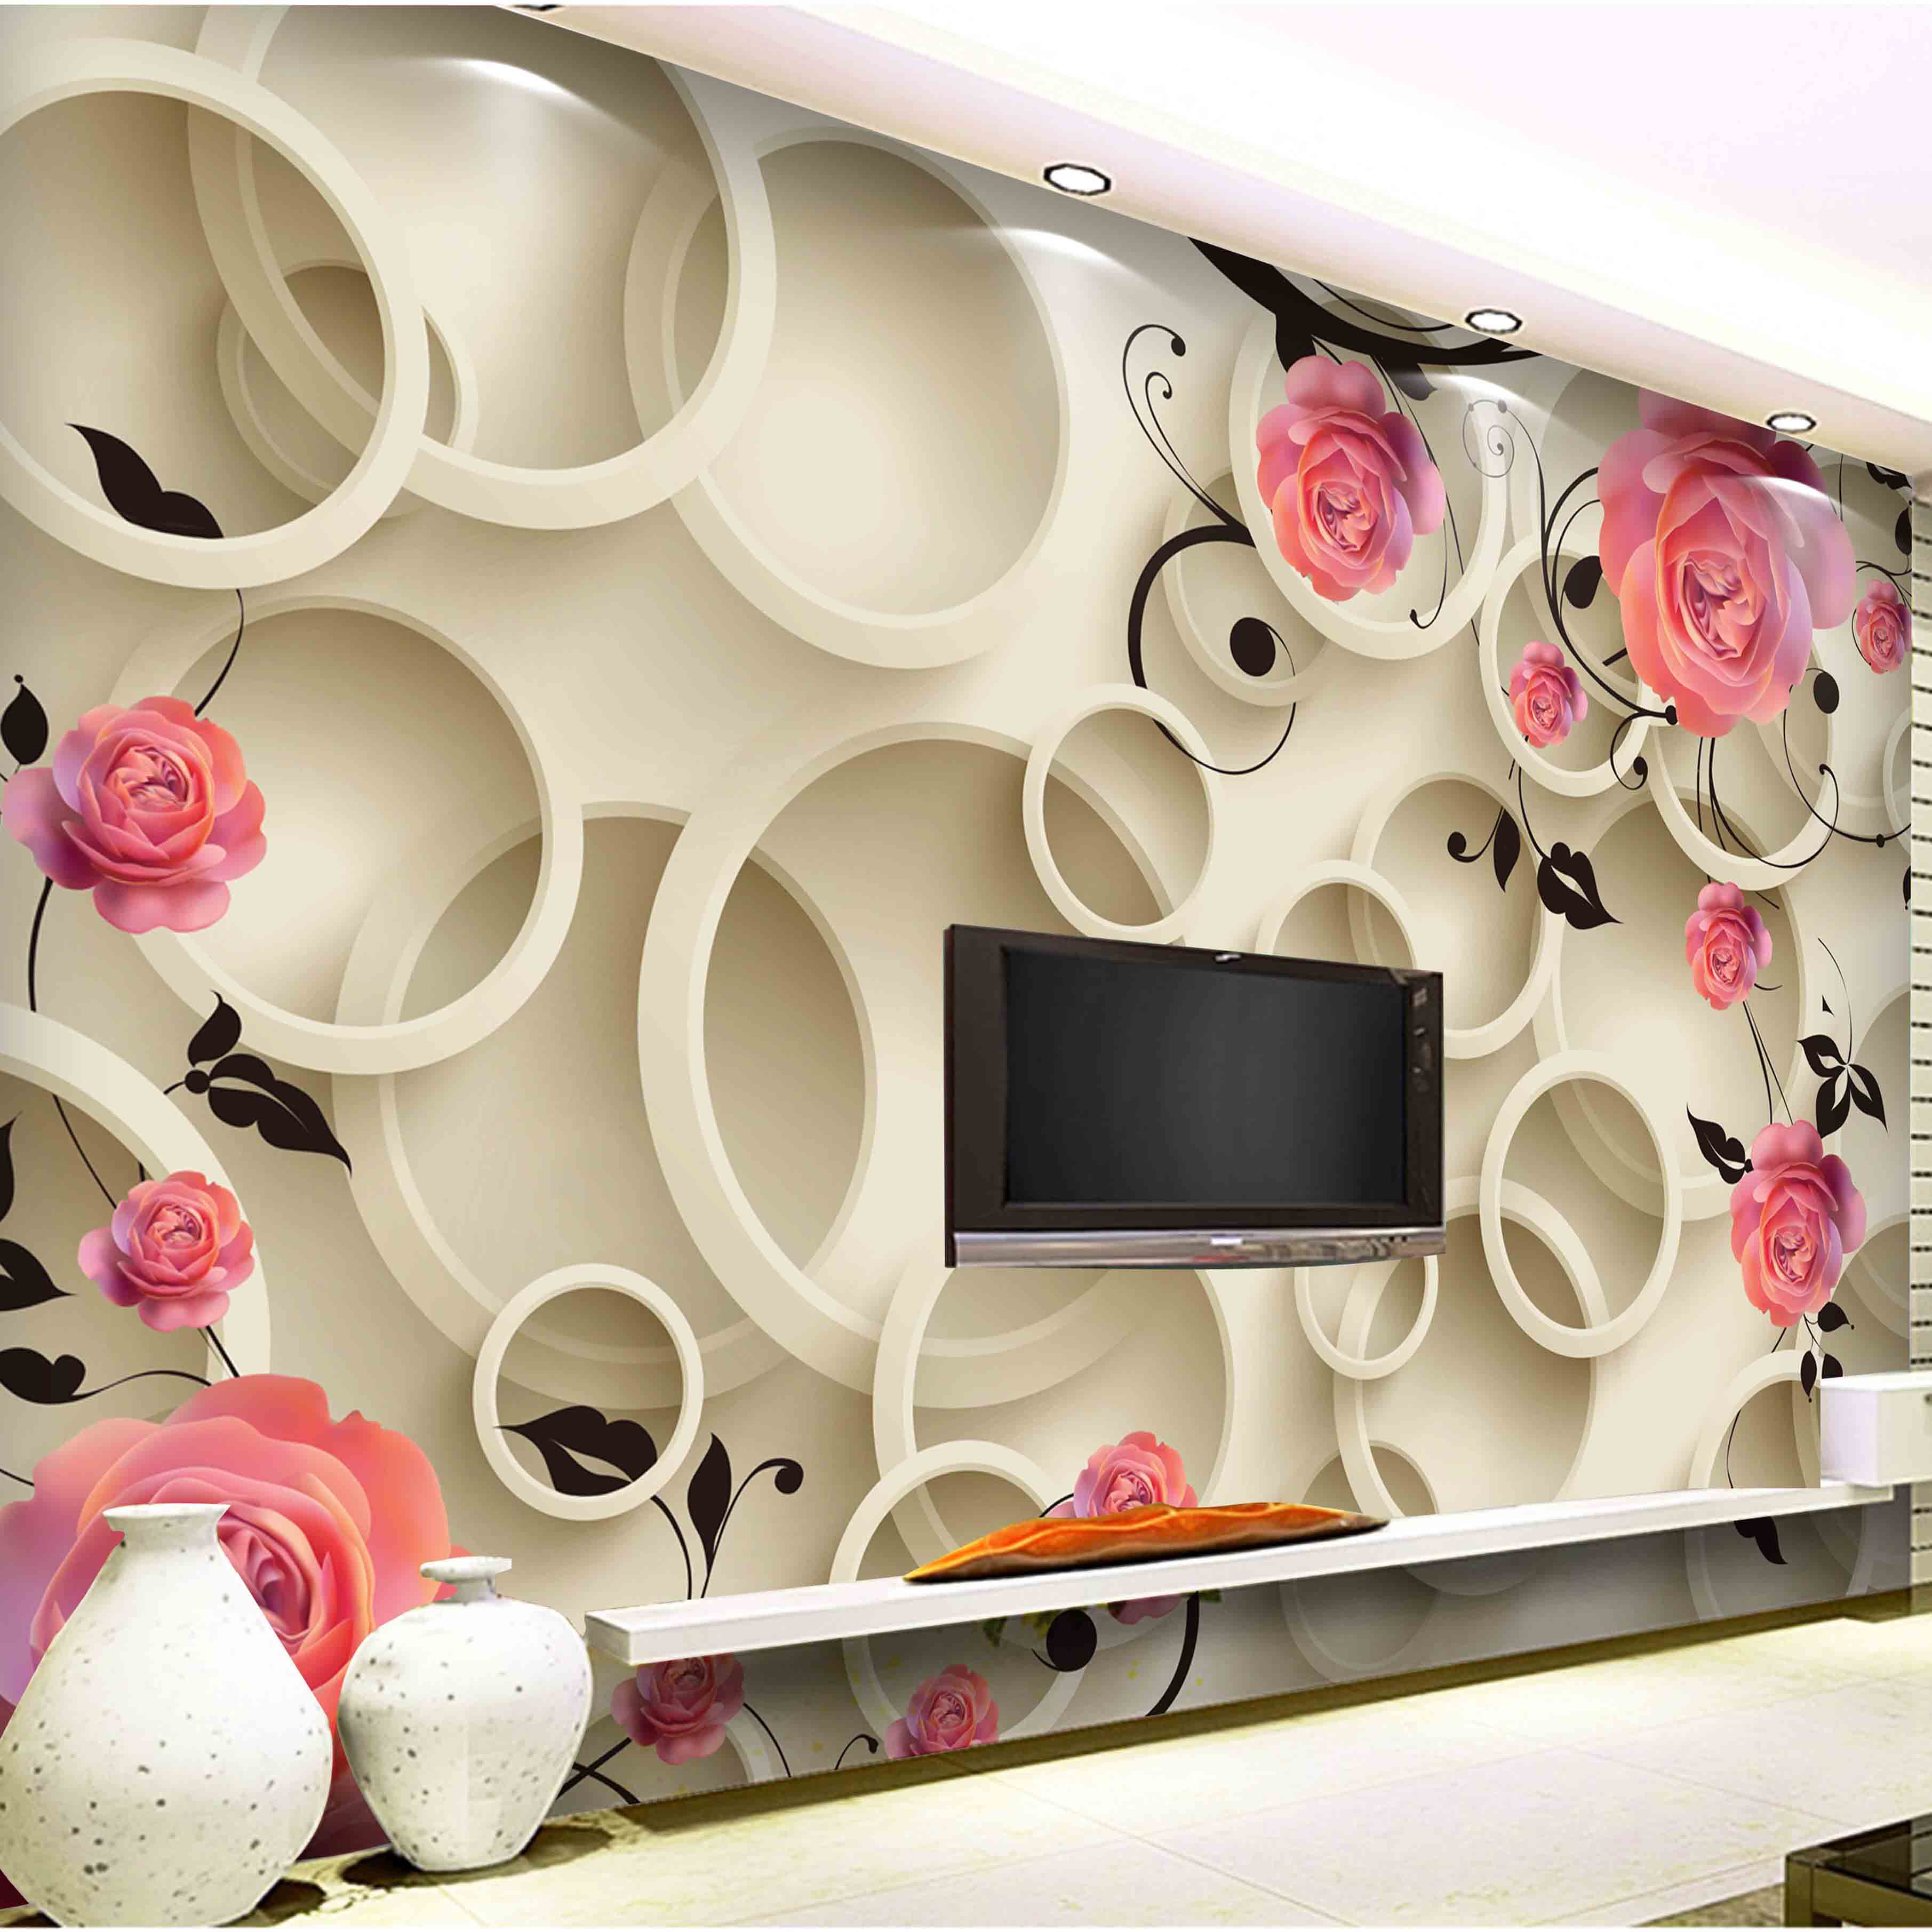 Individuality Brief Tv Background 3d Wallpaper For Wall 3d Hd Rose